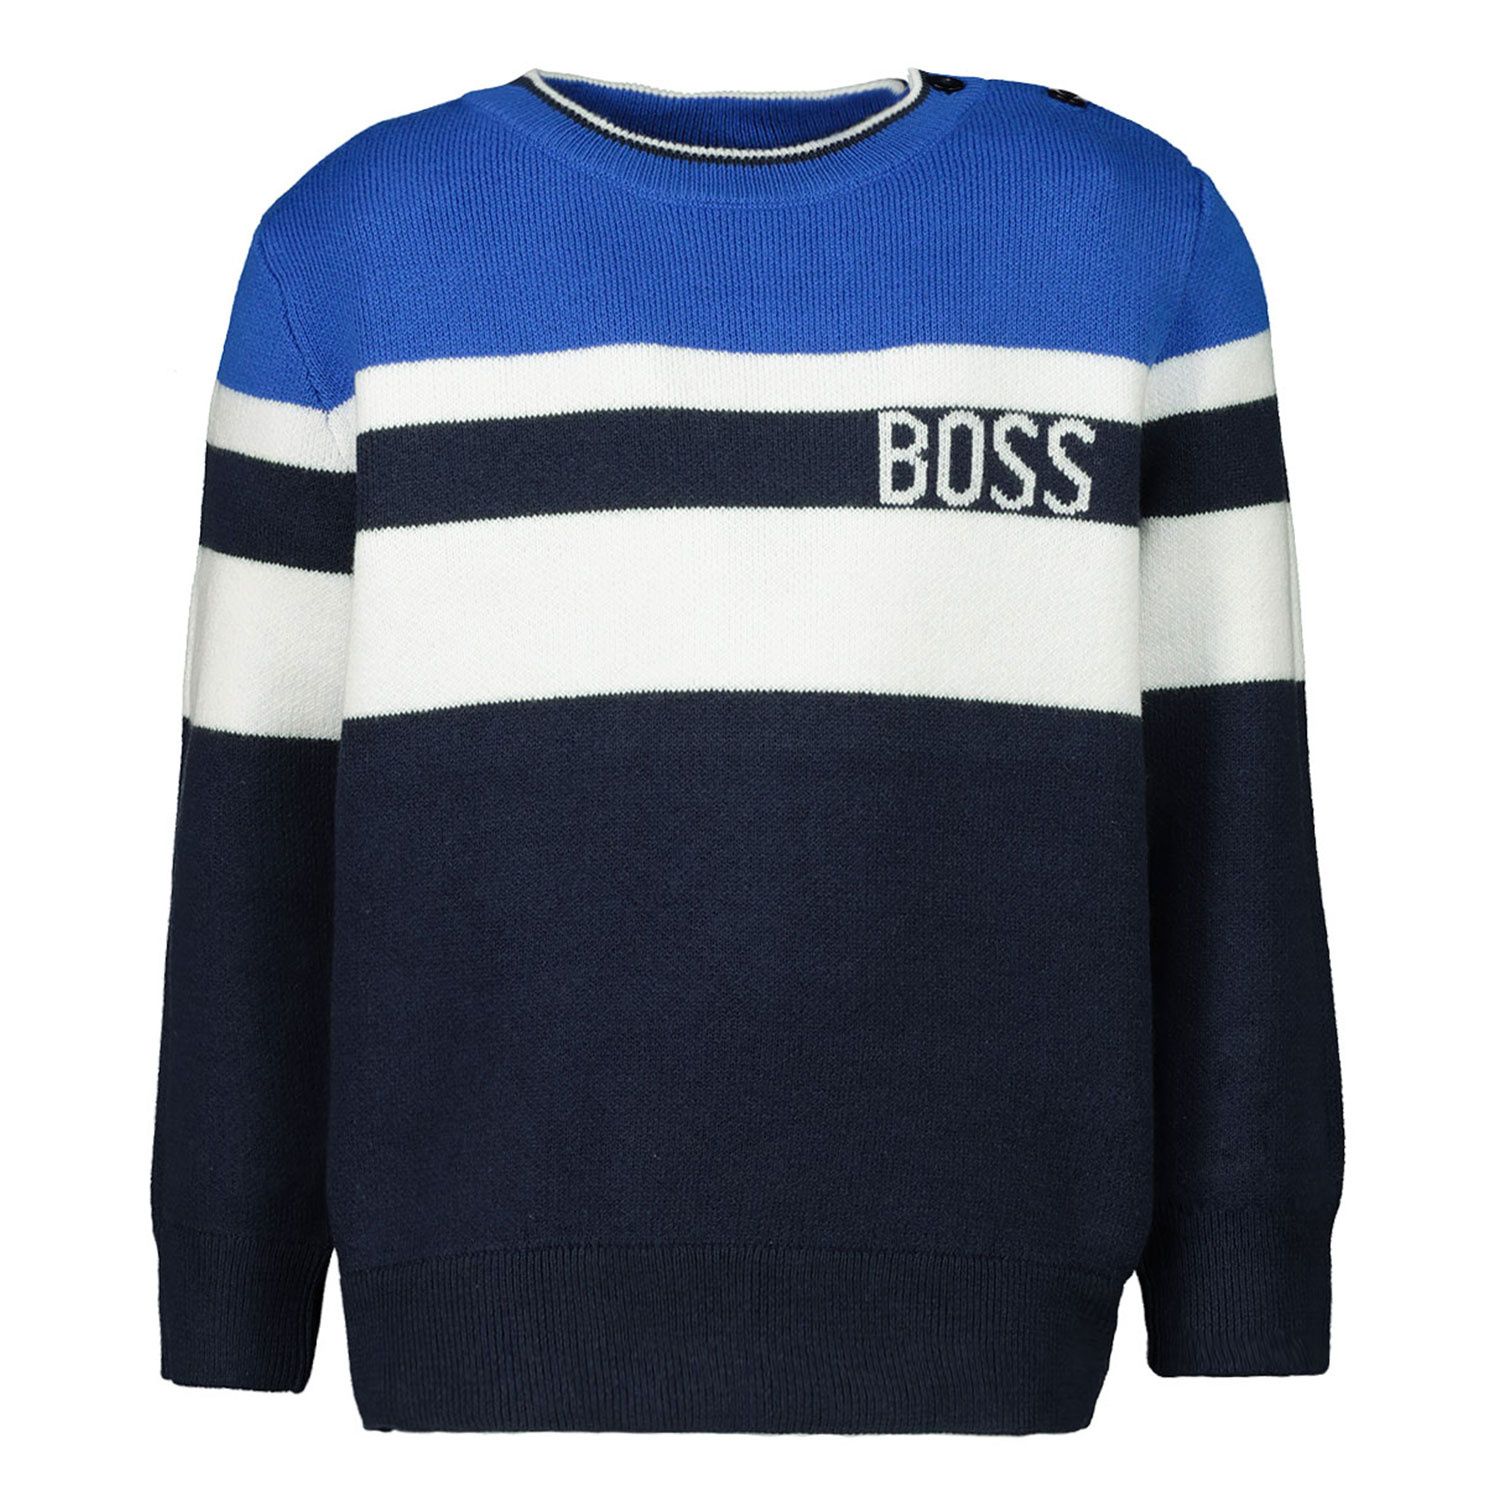 Picture of Boss J05813 baby sweater cobalt blue